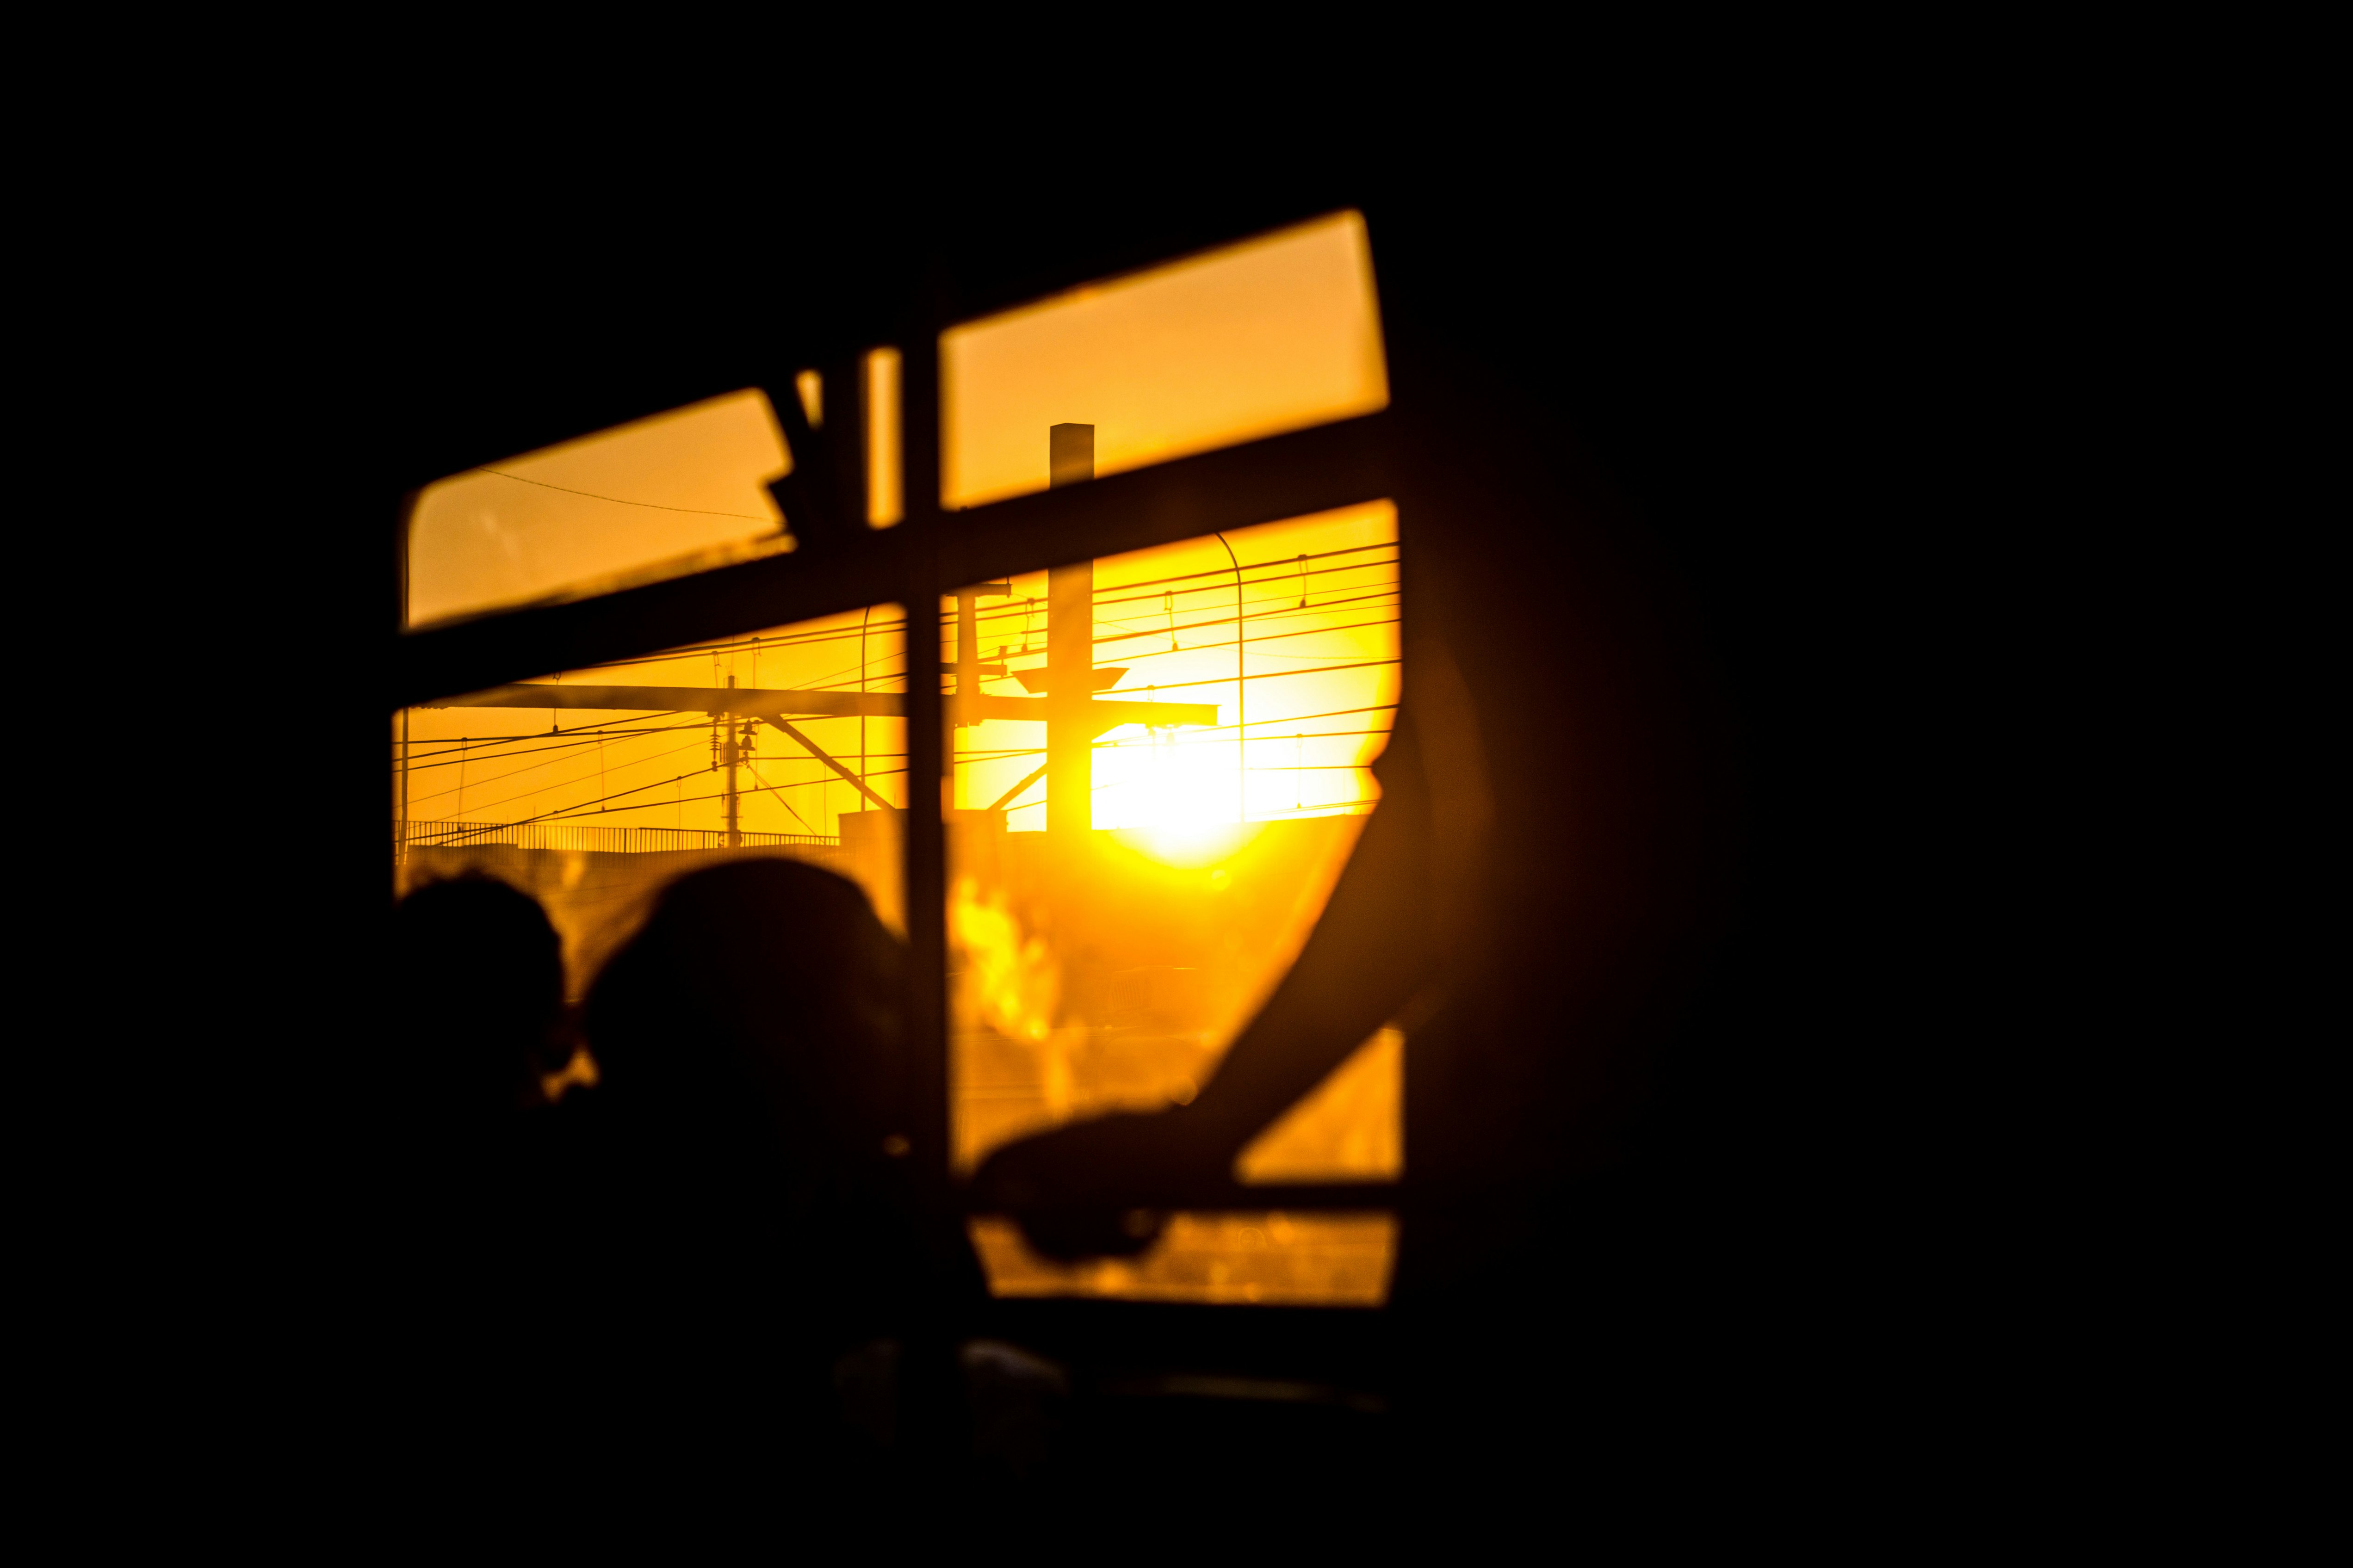 silhouette of people sitting on chair during sunset